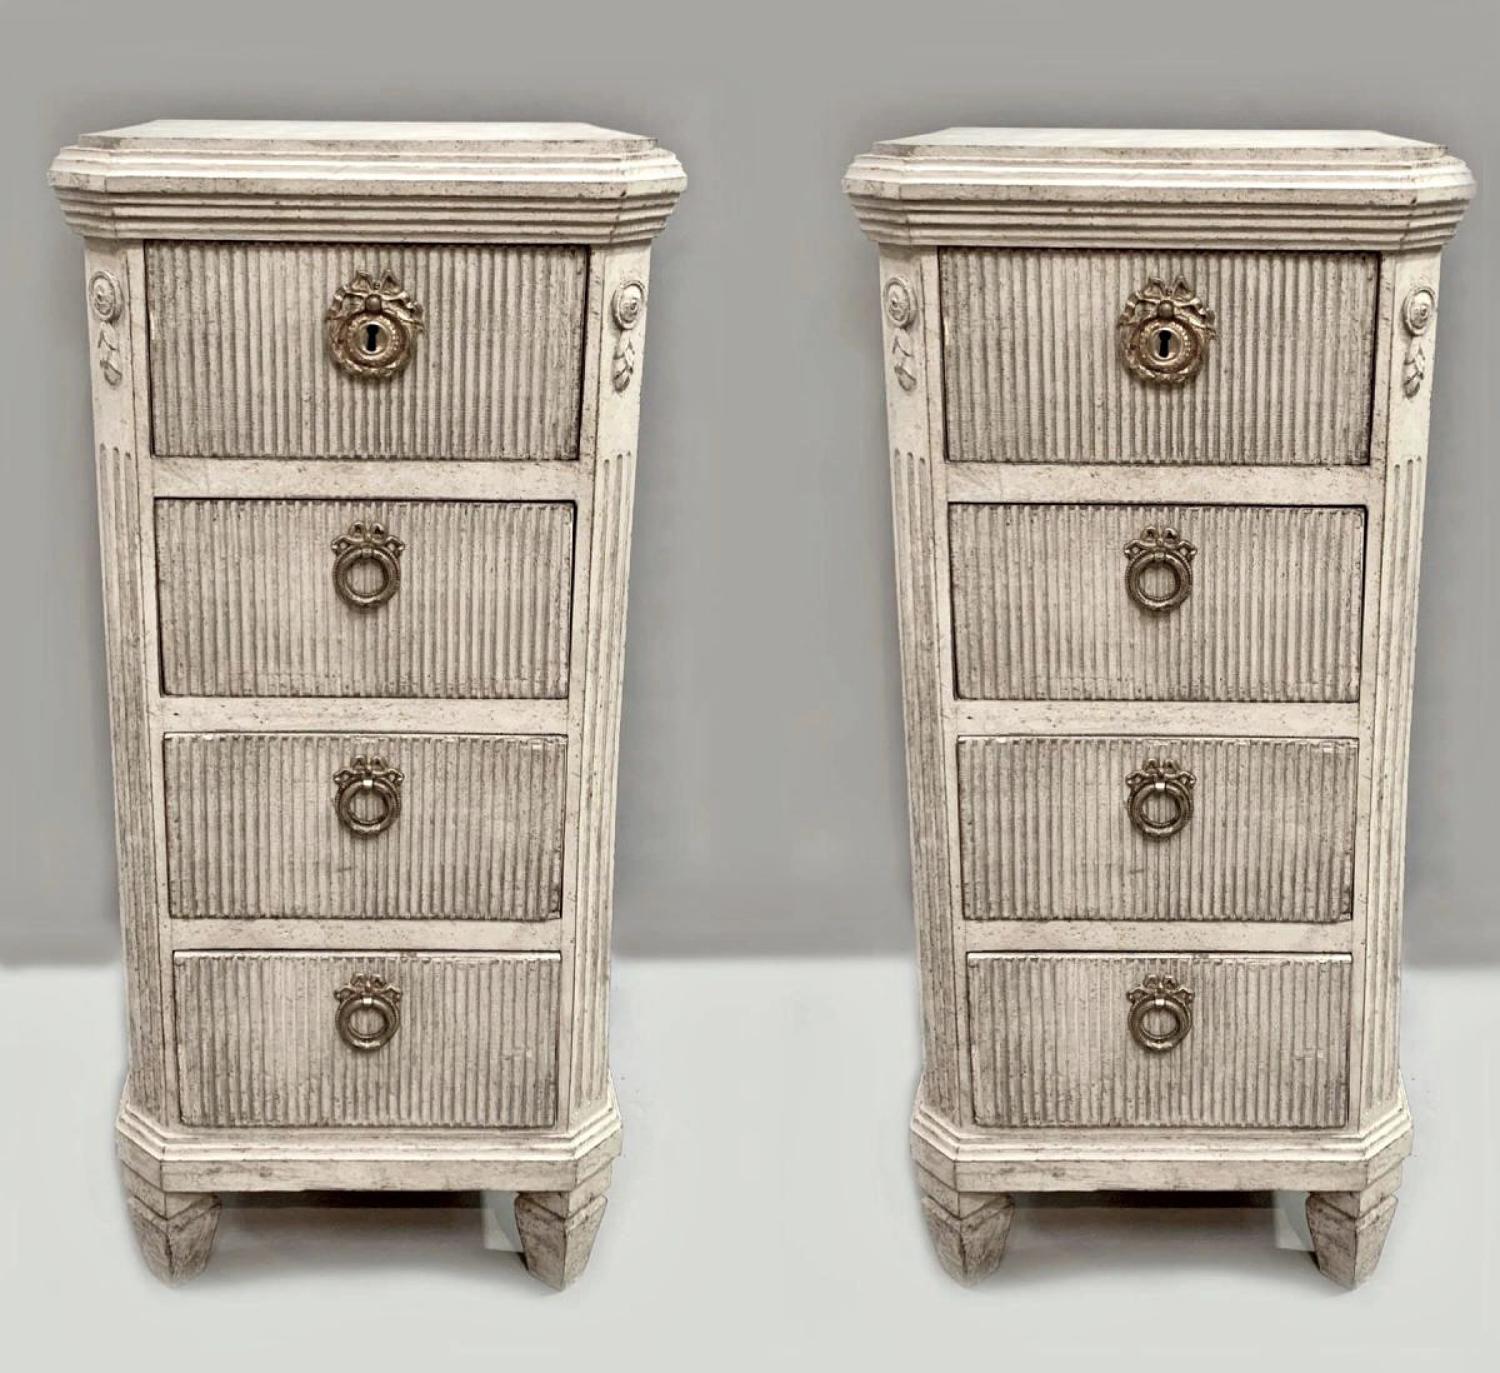 A pair of Swedish Bedside Tables